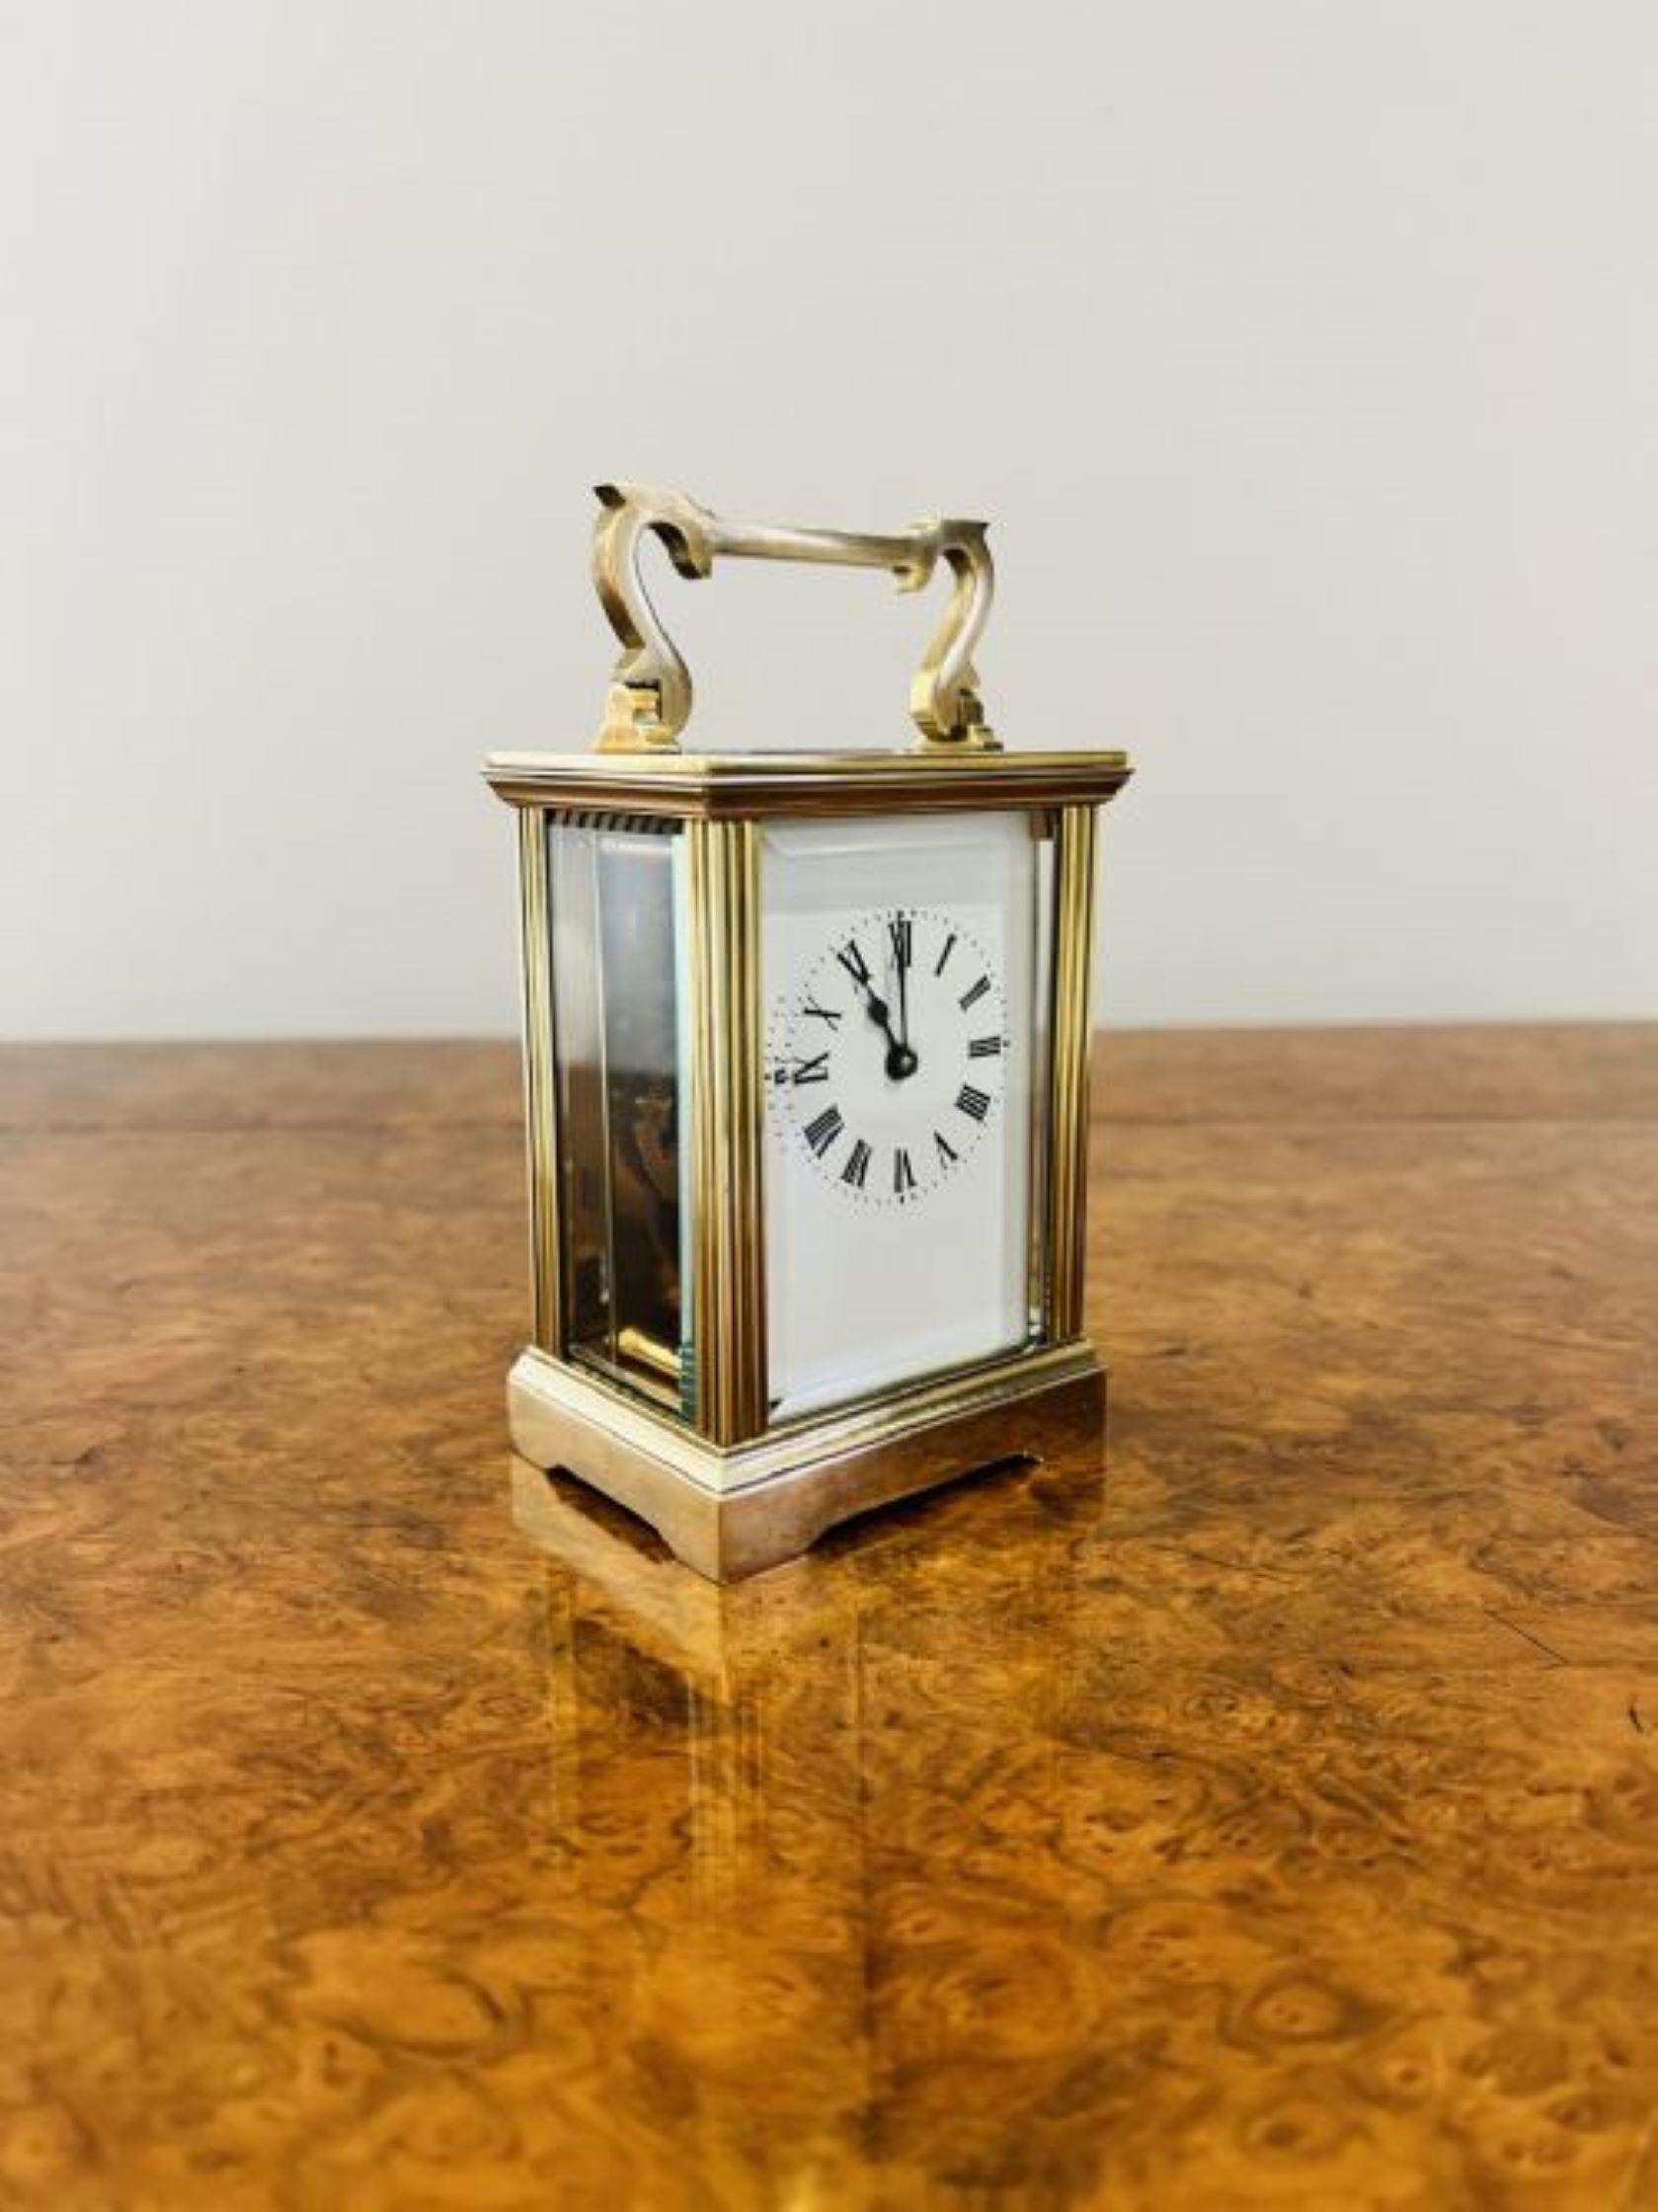 Antique Victorian quality brass carriage clock having a quality brass carriage clock with an eight day French movement, bevelled edge, glass panels and a shaped carrying handle to the top.
Please note all of our clocks are serviced prior to delivery